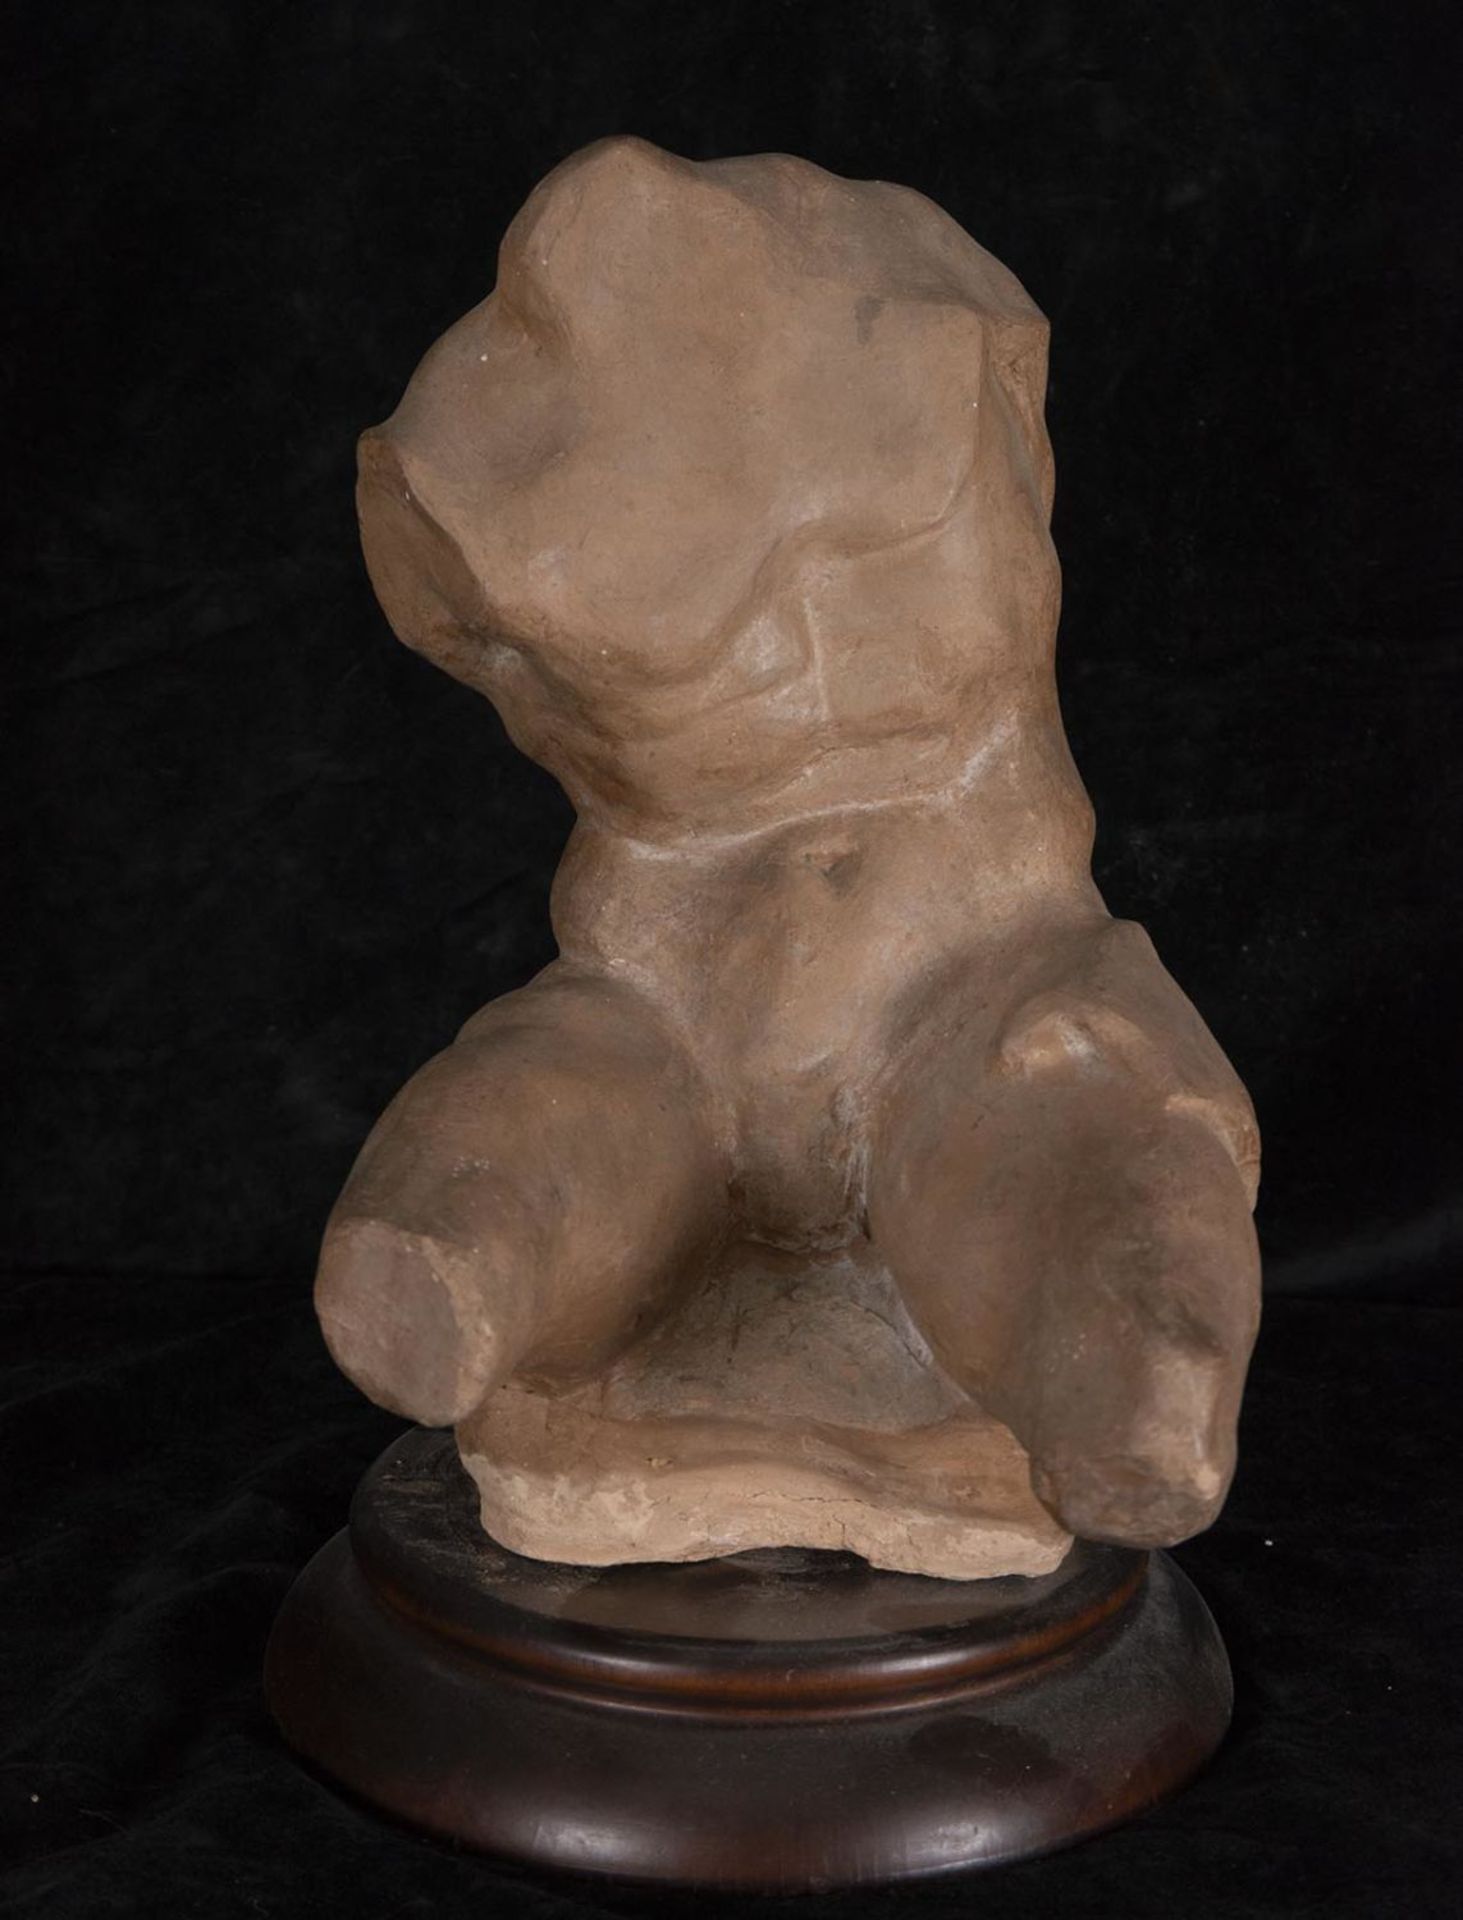 Study of Male Torso in terracotta following Classical models, 19th century French work from the Pari